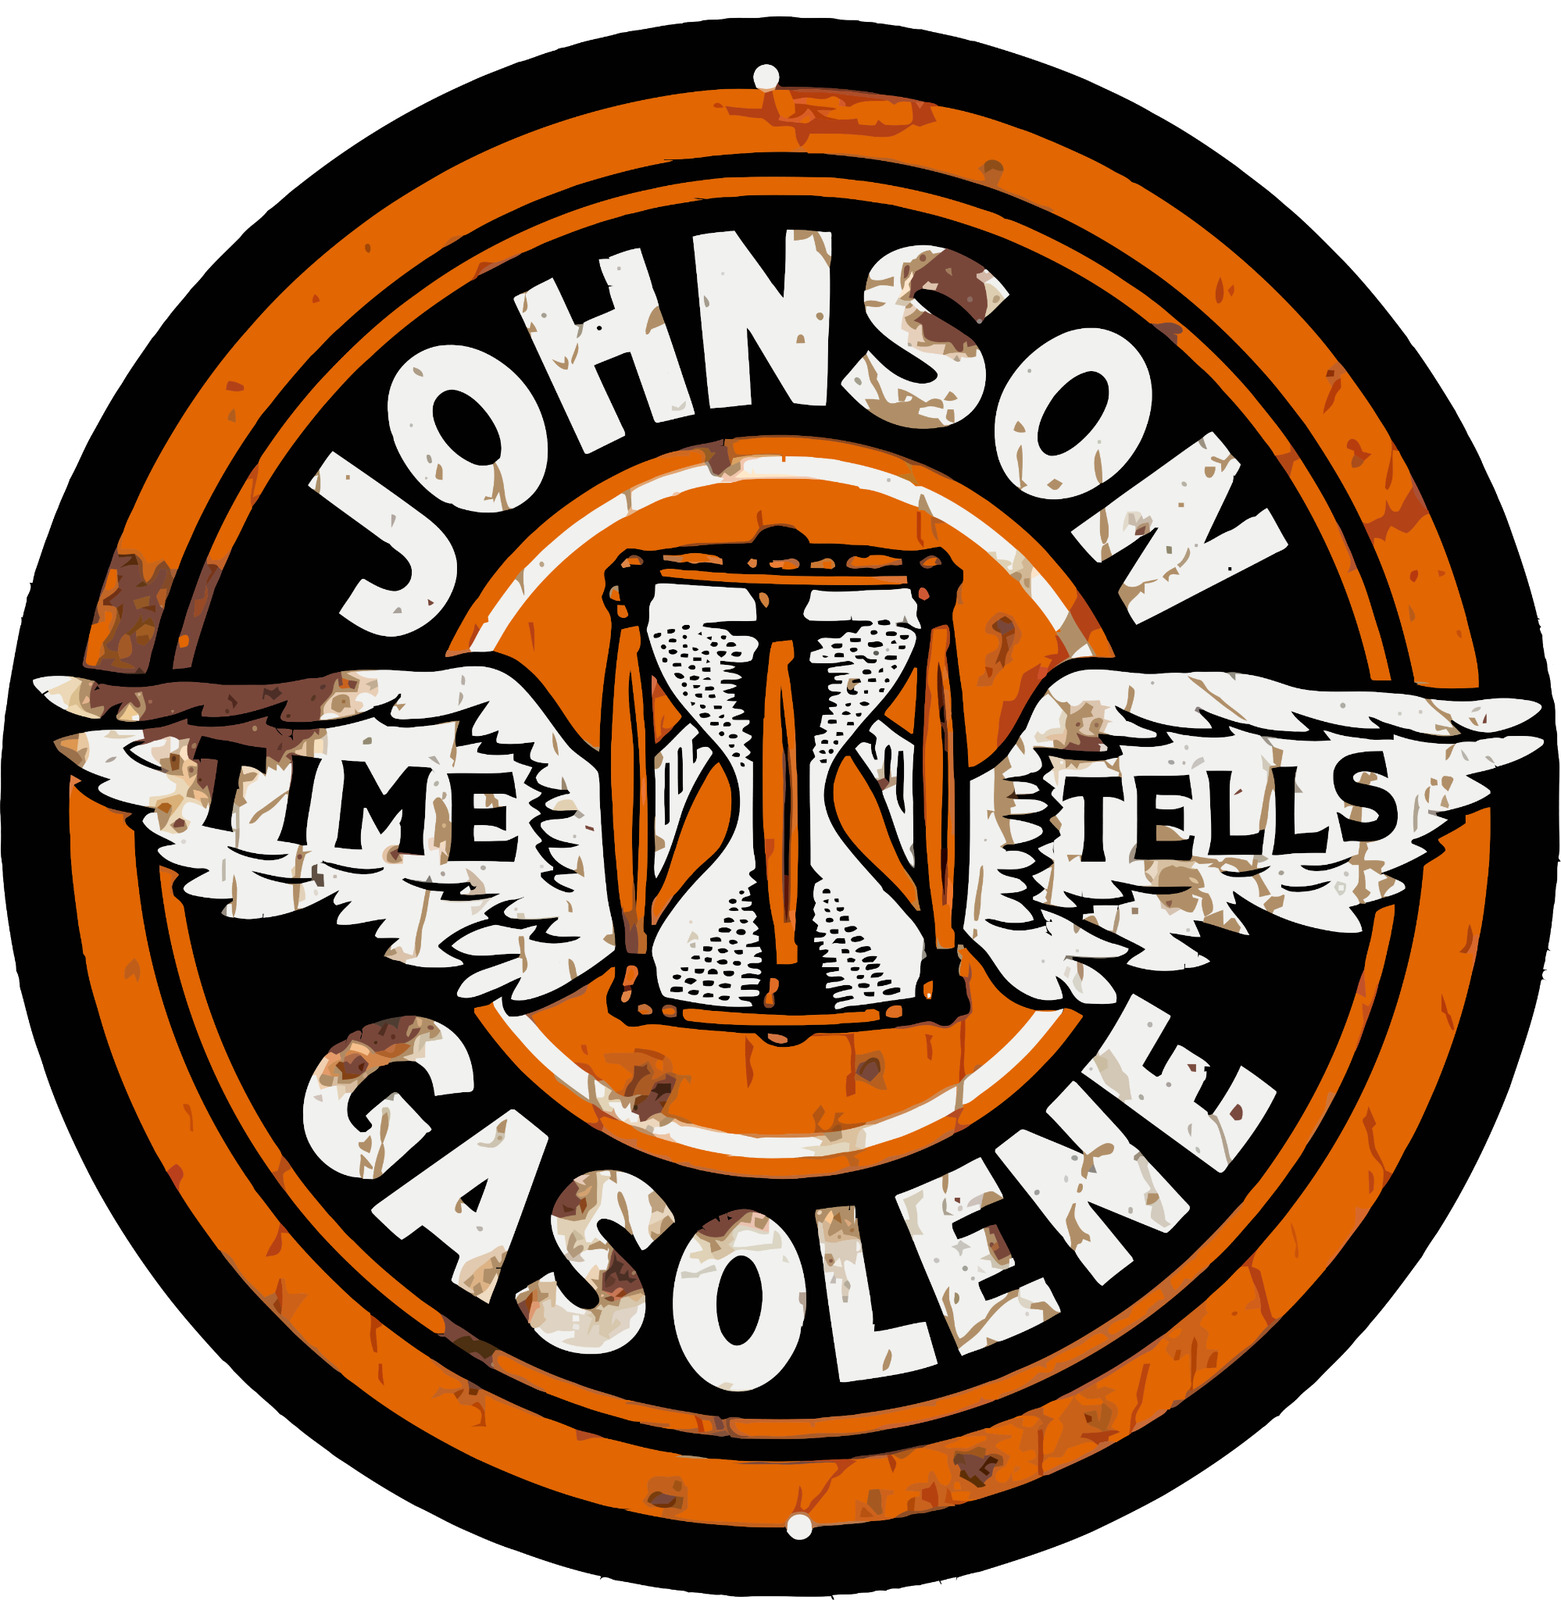 JOHNSON GASOLINE RUSTY ROUND OIL DECALS GAS Vinyl Decal |10 Sizes with TRACKING